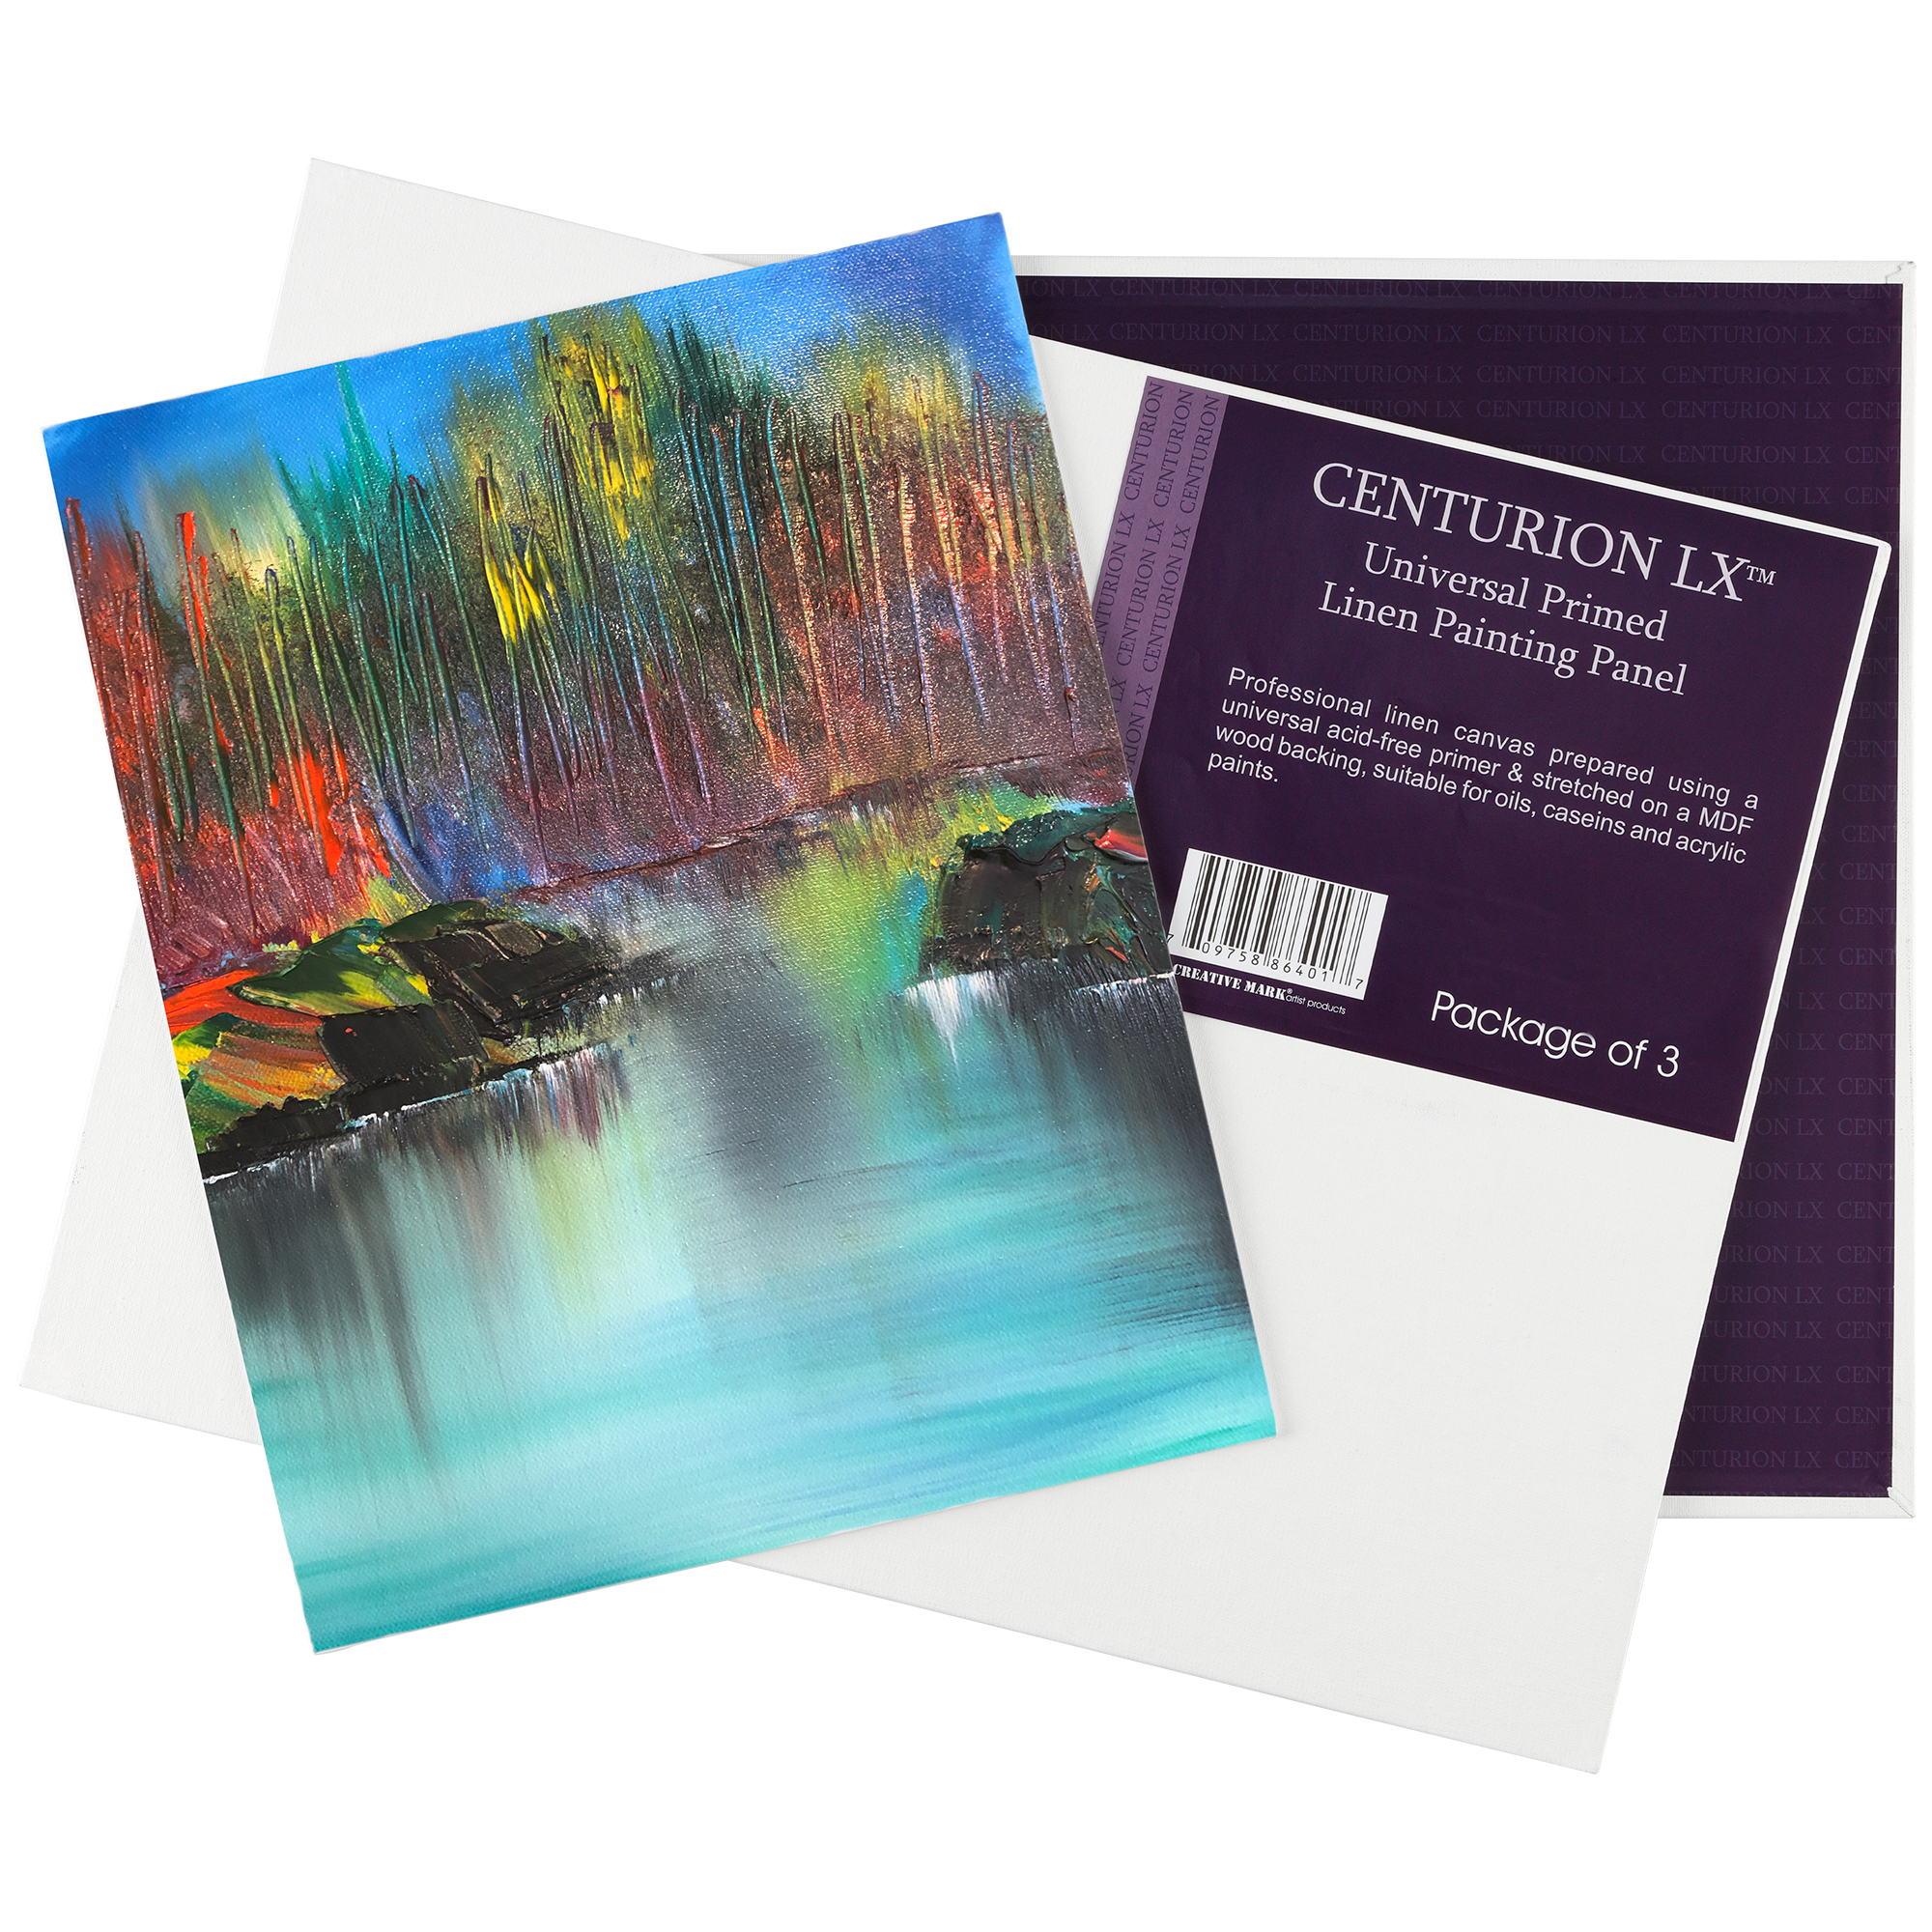 Centurion Universal Acrylic Primed Linen Panels -4x4Canvases for Painting  - 3 pack of Canvases for Oils, Acrylics, Water-Mixable Oils, and More 